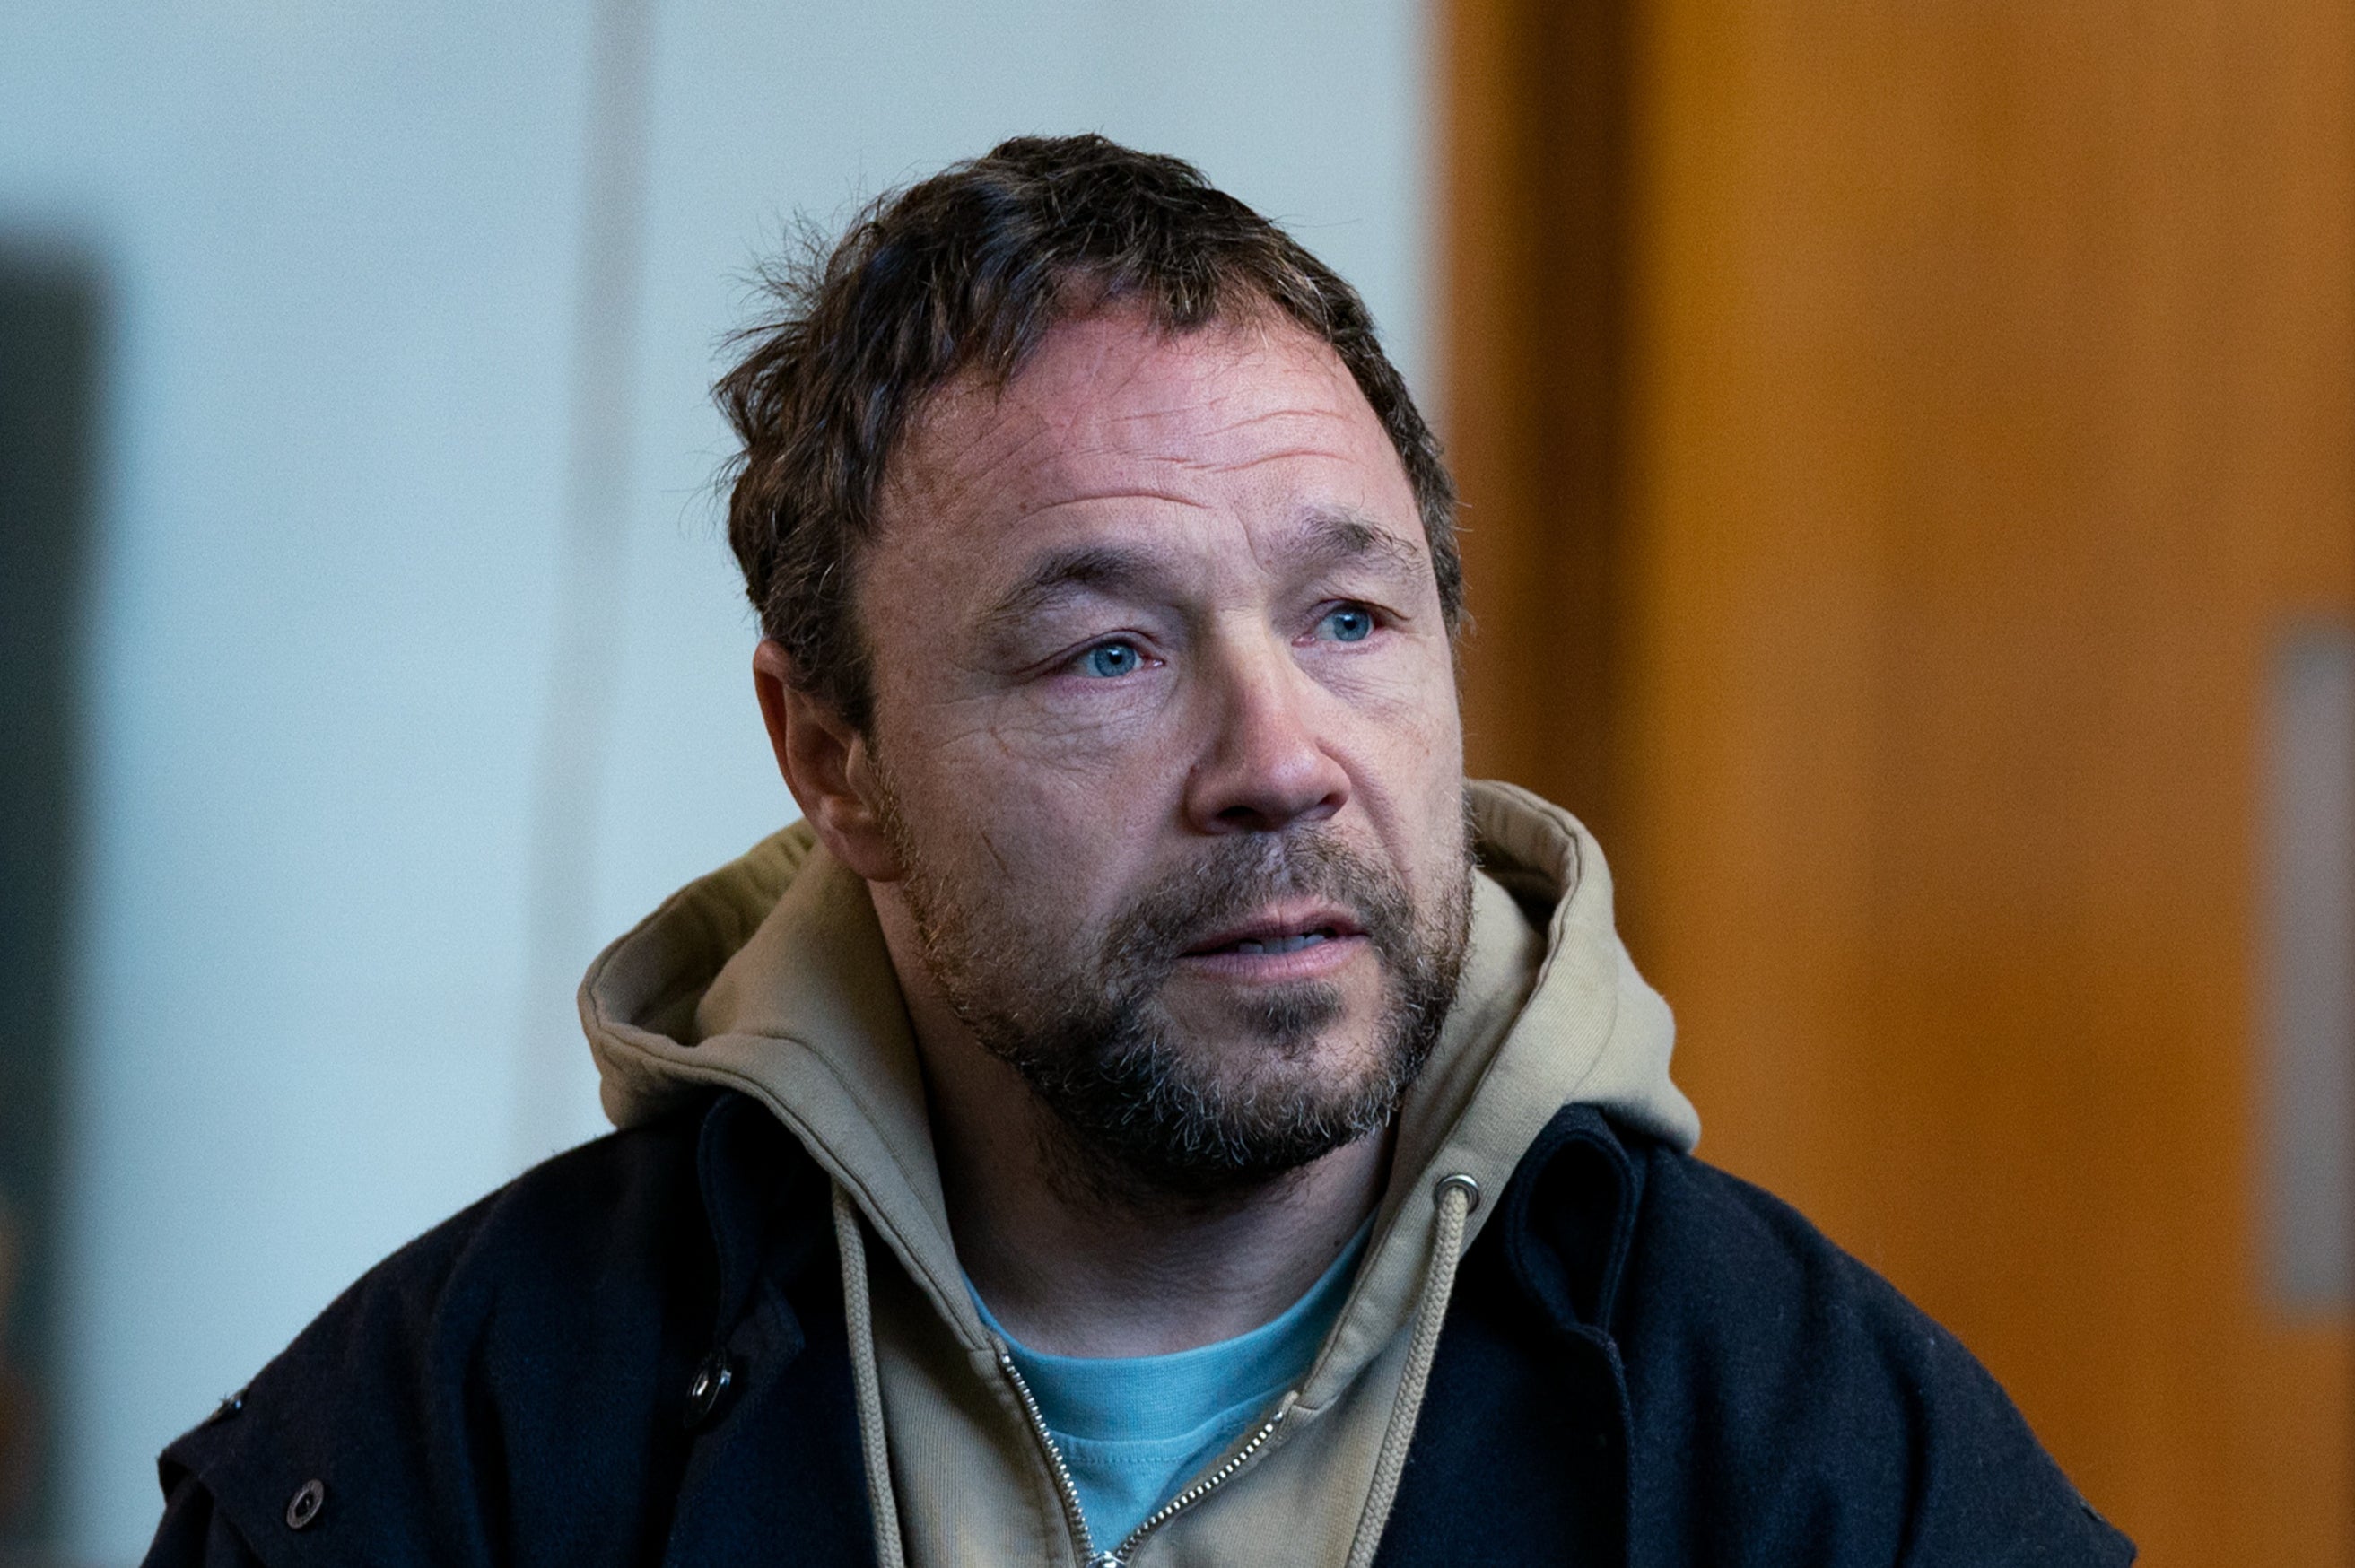 Brought to the boil: Stephen Graham as Andy in the culinary drama ‘Boiling Point’